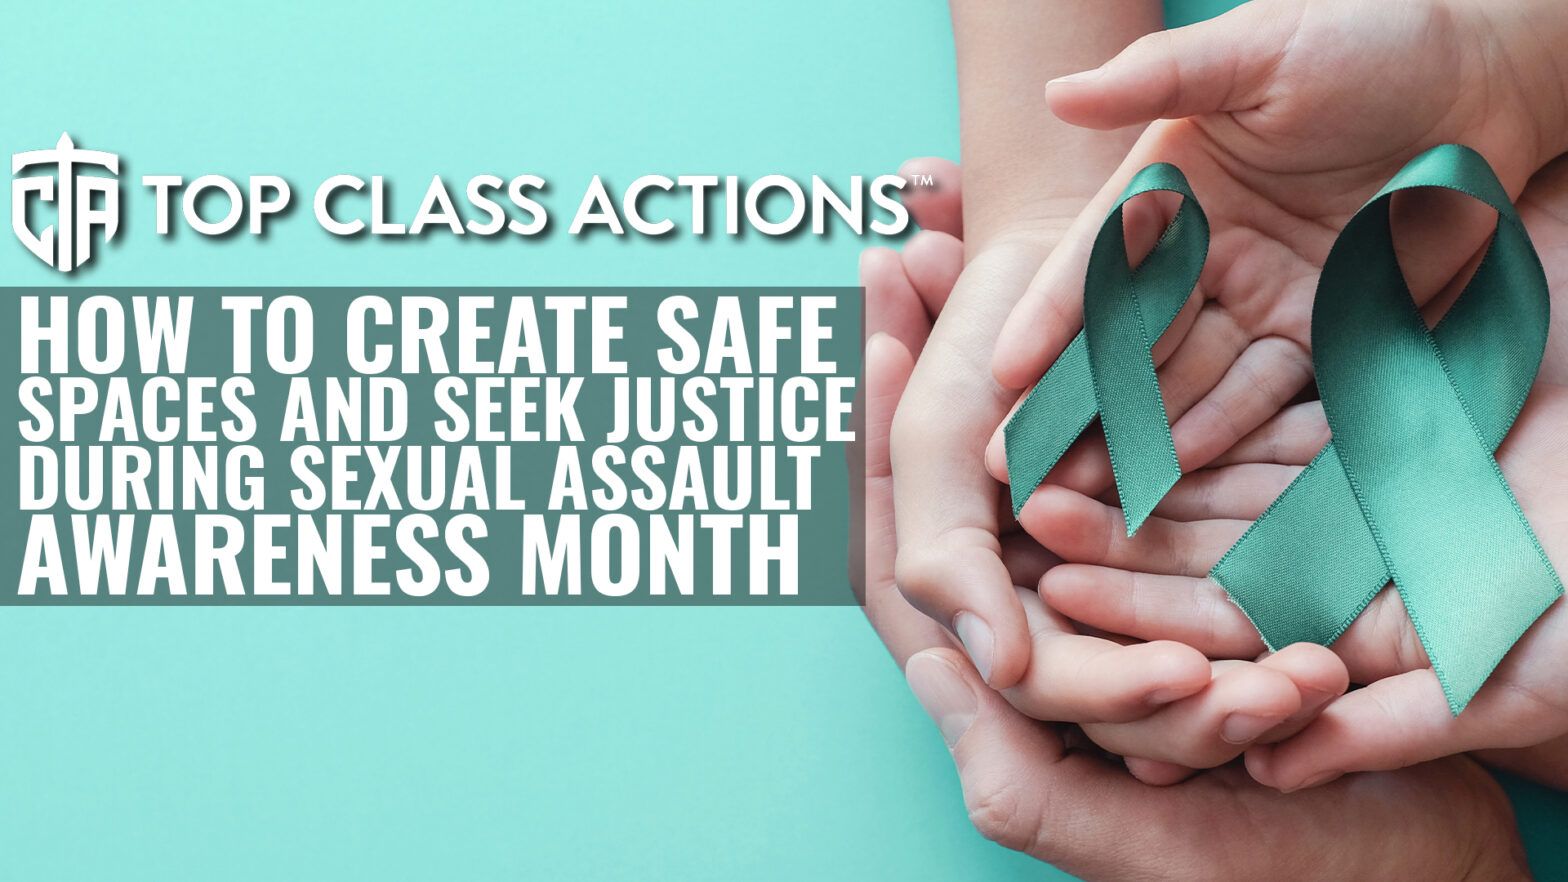 How To Create Safe Spaces And Seek Justice During Sexual Assault Awareness Month Laptrinhx News 2386